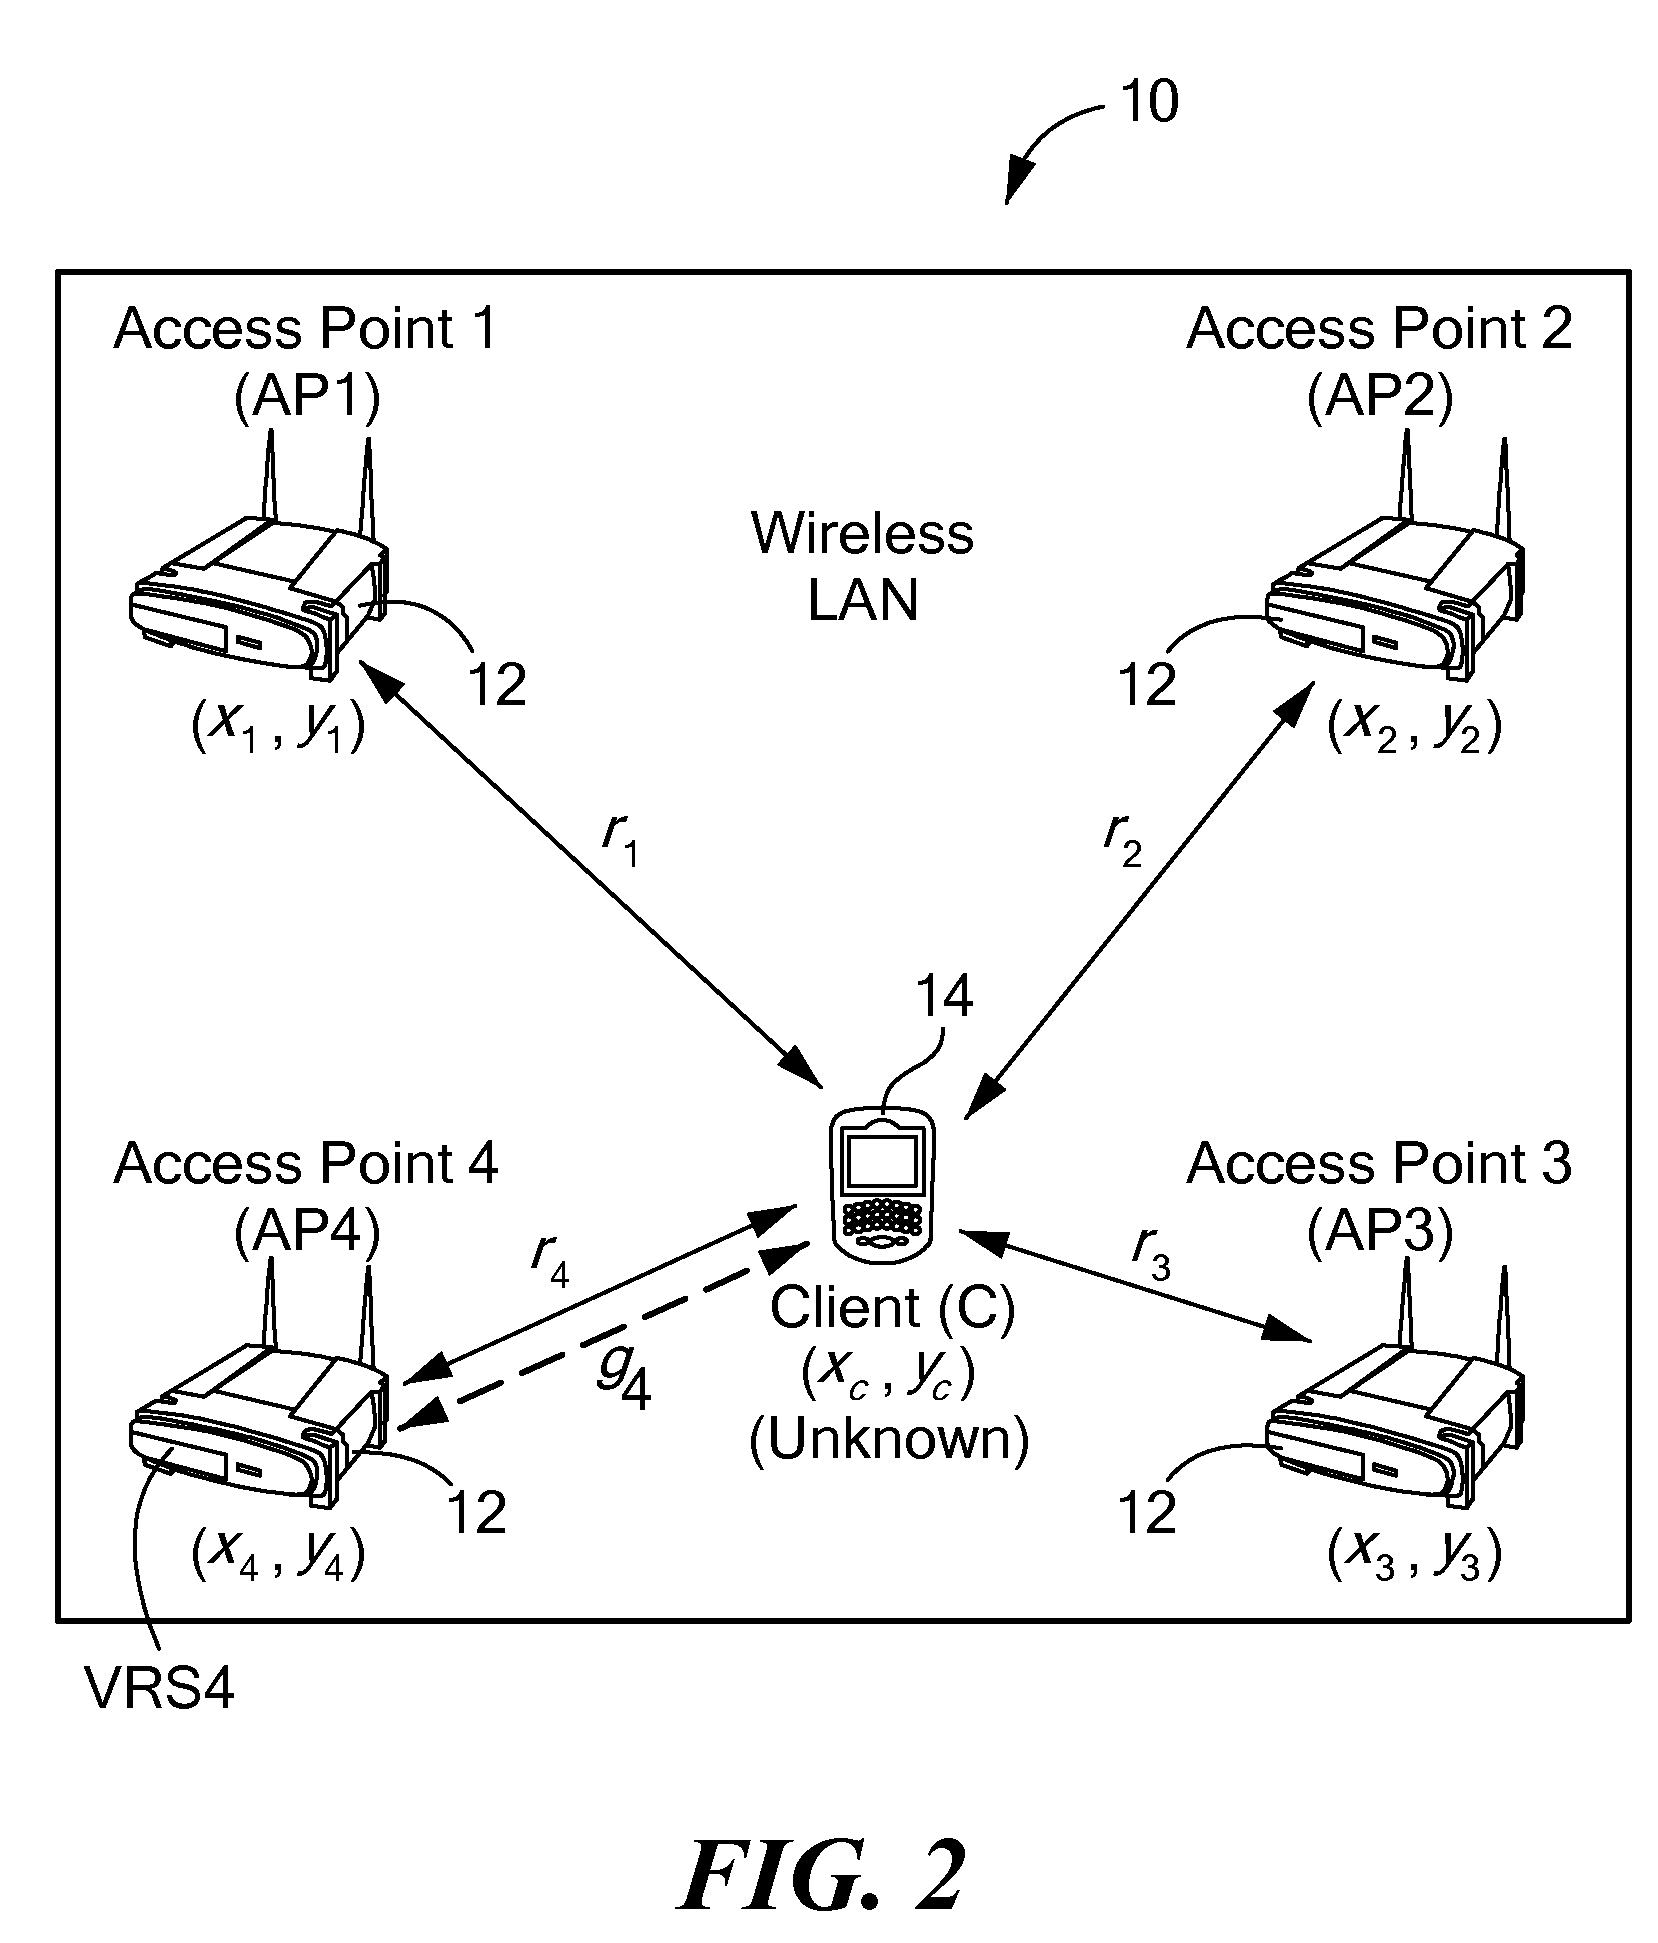 Method and system for wireless LAN-based indoor position location